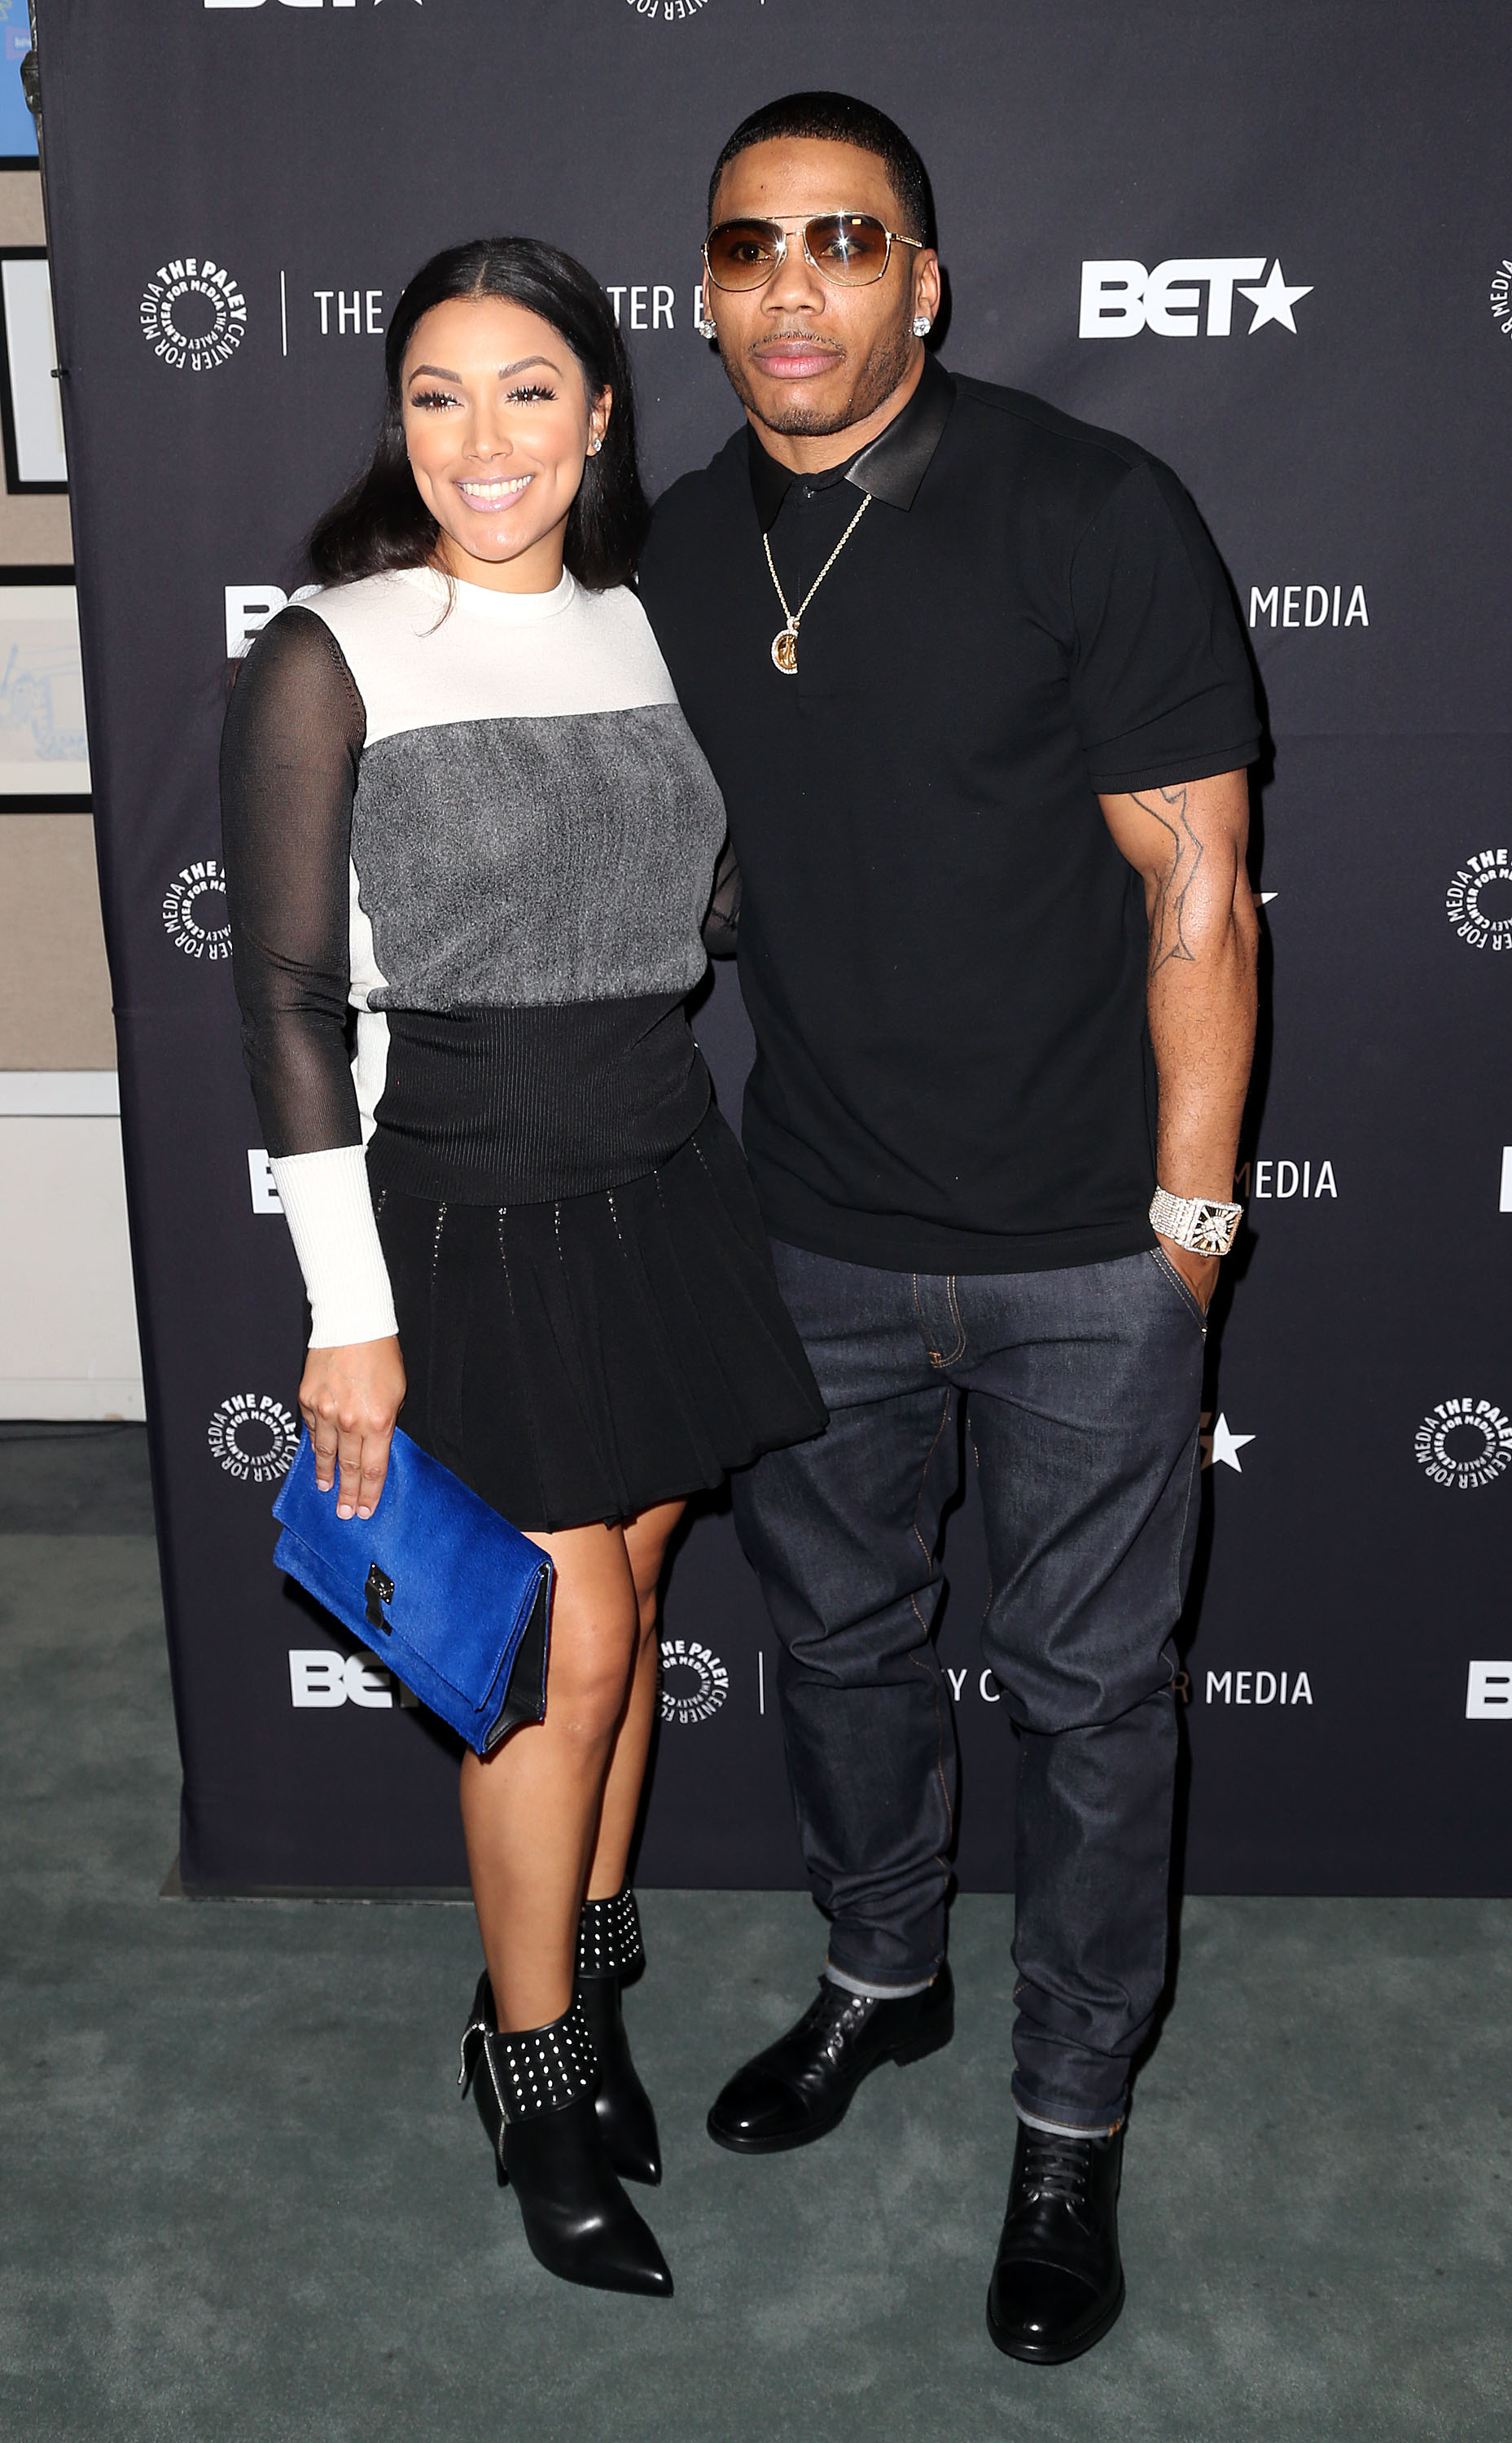 Nelly’s Girlfriend Releases Statement On Sexual Assault Allegations: “False Claims”